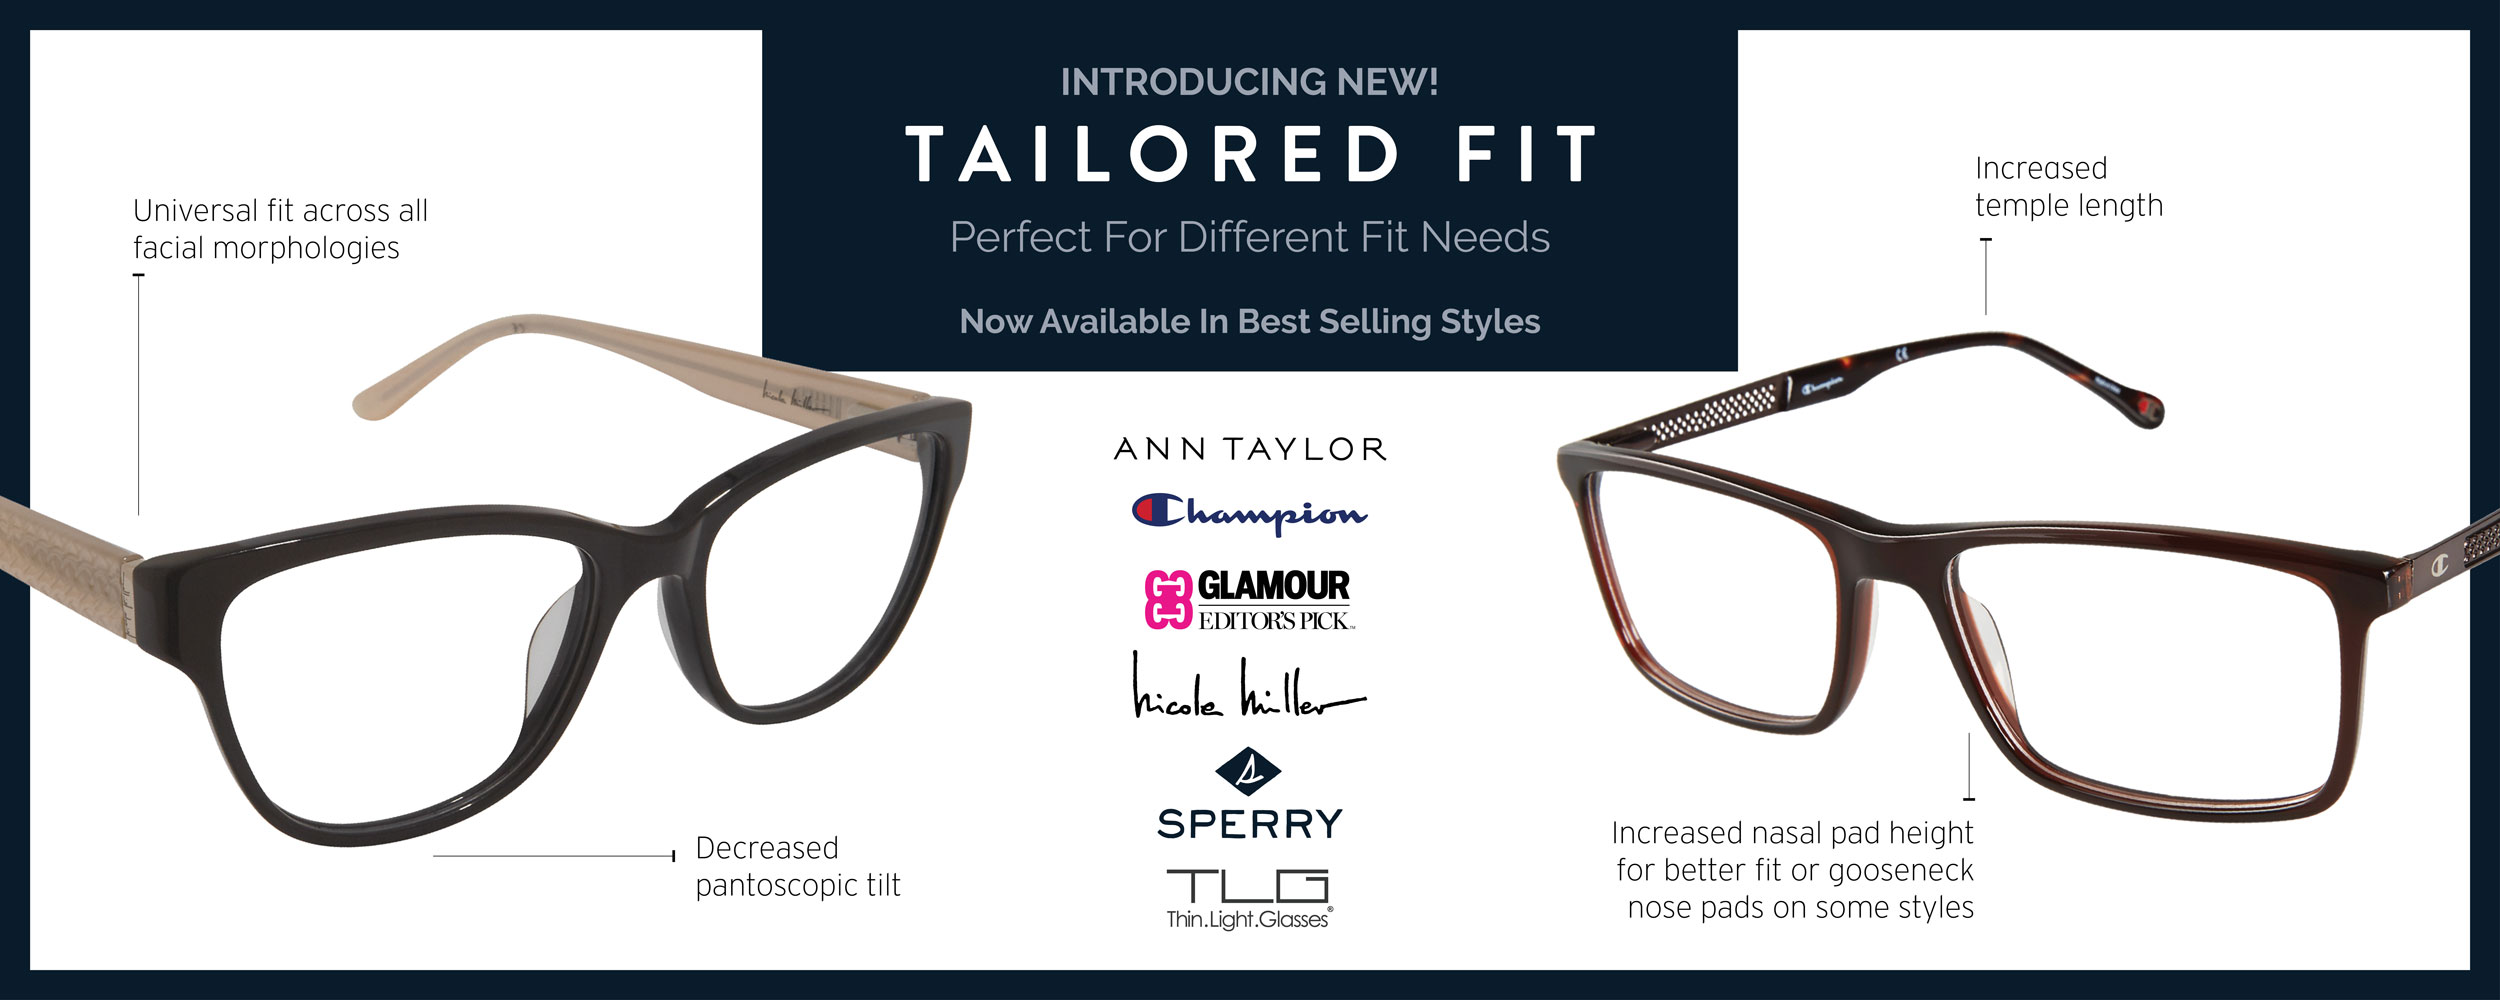 Introducing New! Tailored Fit. Perfect For Different Fit Needs. Now Available In Best Selling Styles.